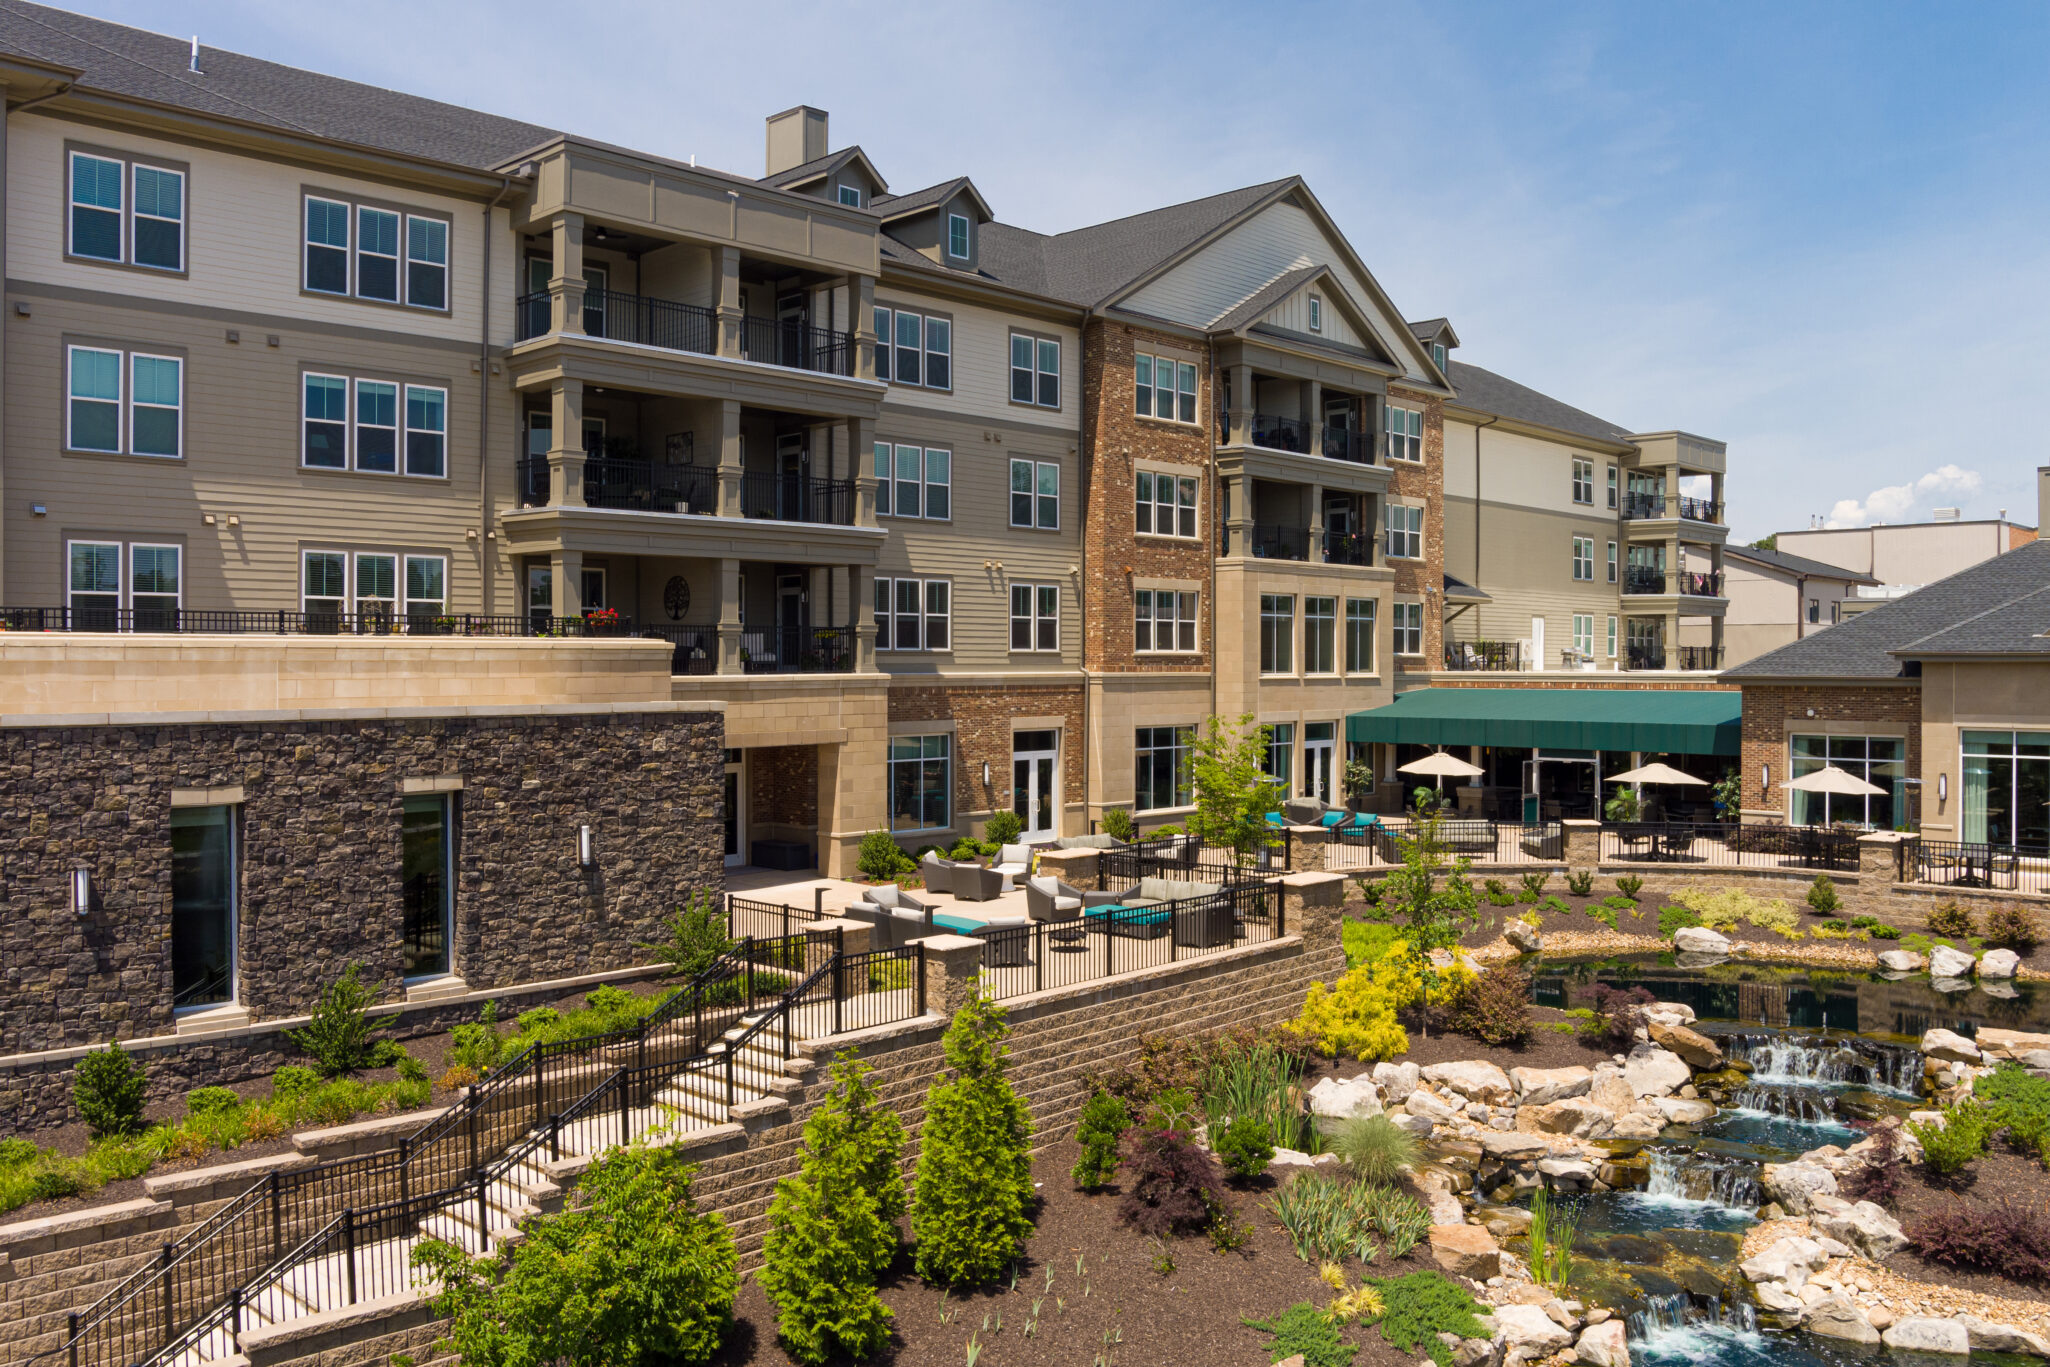 A photo of Lakewood retirement community with a waterfall landscaping and apartments